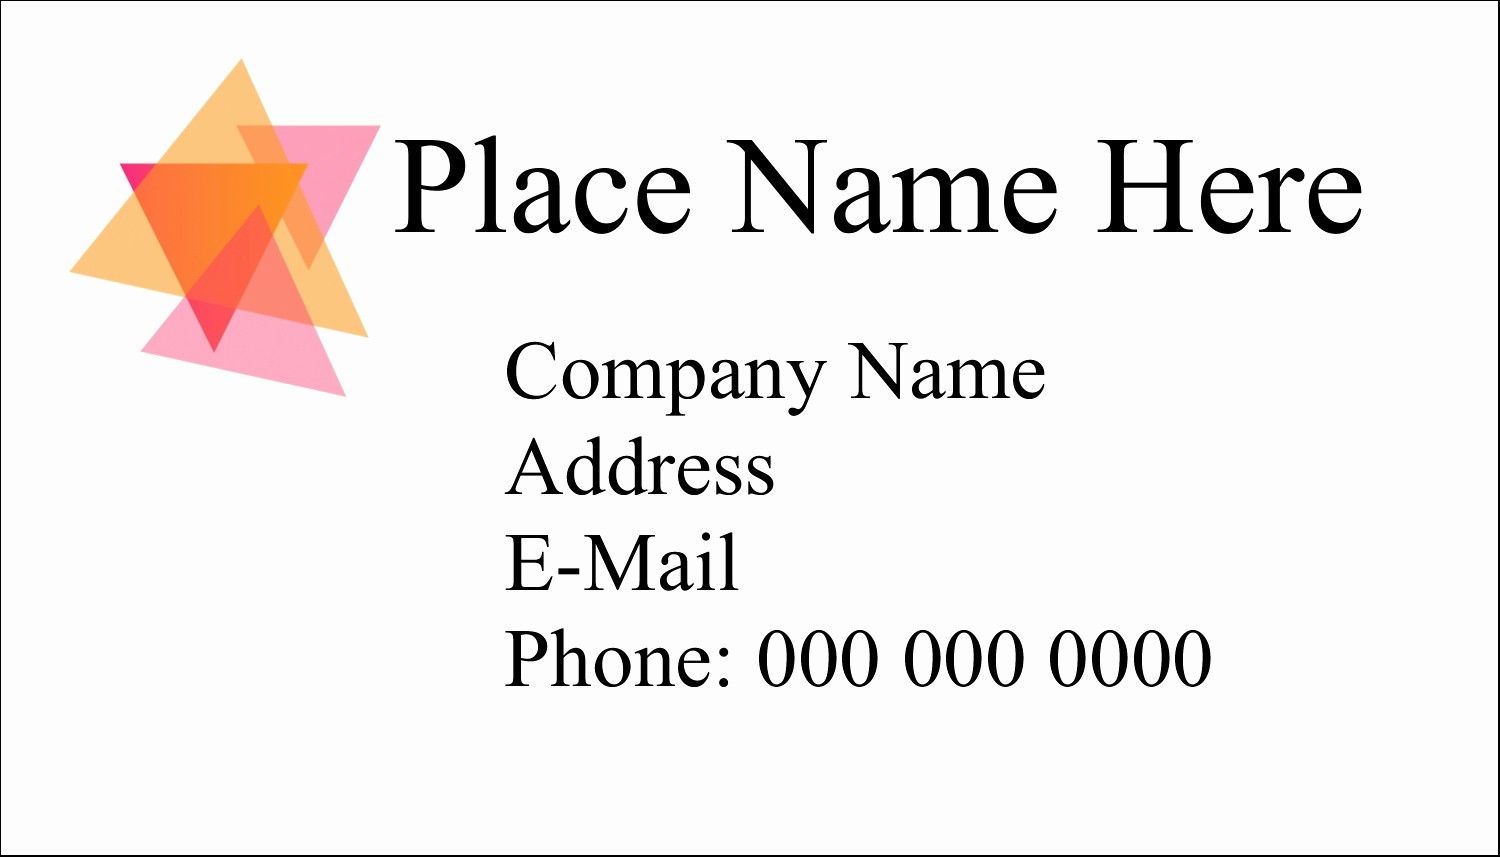 Royal Brites Business Cards Template New Royal Brites Business Cards Template New Royal Brites